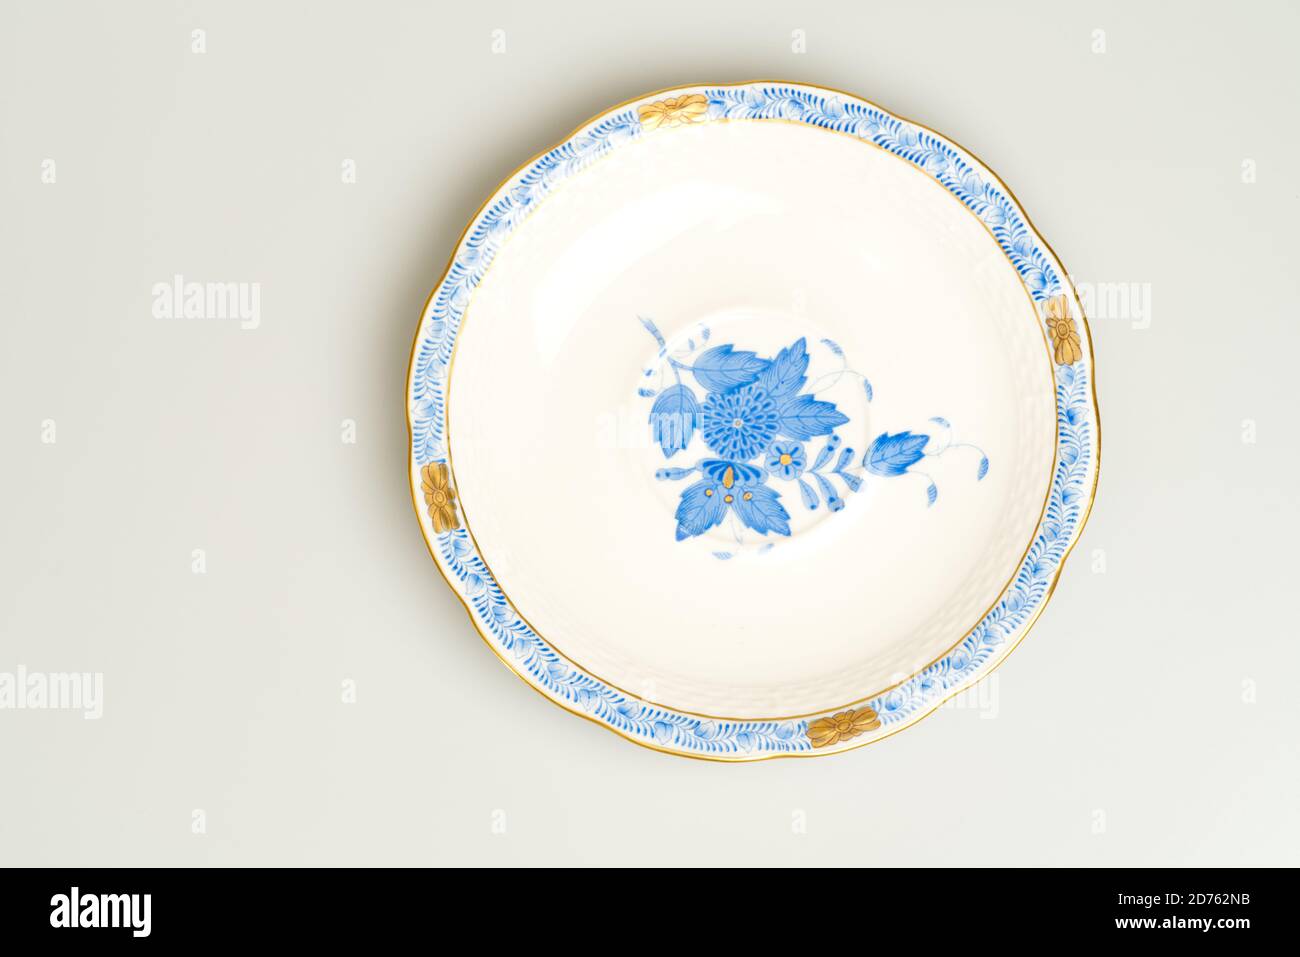 Saucer on light background. Herend Porcelain Hungary Manufacture Stock Photo